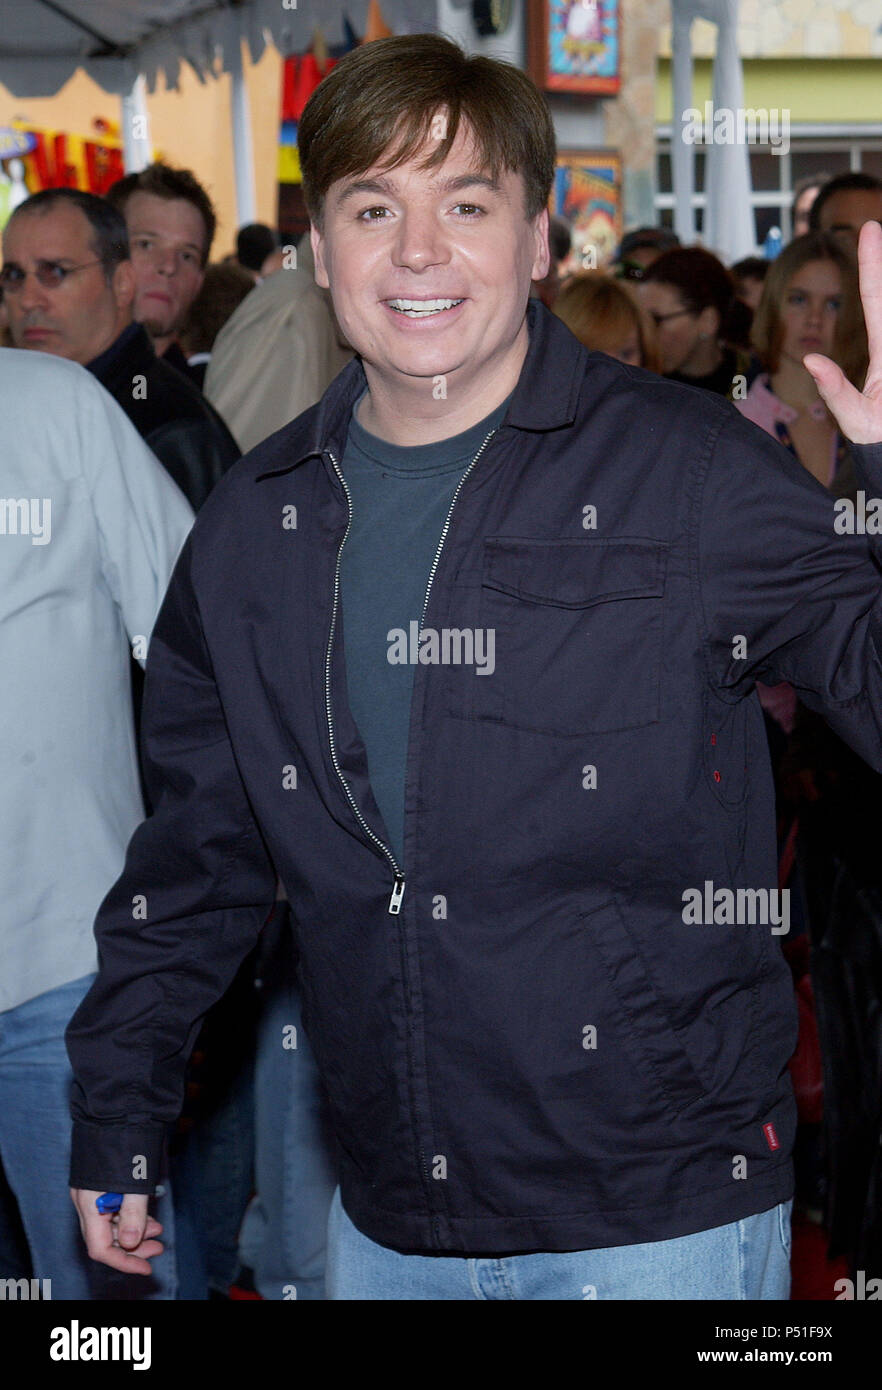 Mike Myers arriving at the ' Dr. Seuss 'The Cat In The Hat Premiere '   at the Universal Amphitheatre in Los Angeles. November 8, 2003.MyersMike19 Red Carpet Event, Vertical, USA, Film Industry, Celebrities,  Photography, Bestof, Arts Culture and Entertainment, Topix Celebrities fashion /  Vertical, Best of, Event in Hollywood Life - California,  Red Carpet and backstage, USA, Film Industry, Celebrities,  movie celebrities, TV celebrities, Music celebrities, Photography, Bestof, Arts Culture and Entertainment,  Topix, vertical, one person,, from the years , 2003 to 2005, inquiry tsuni@Gamma-US Stock Photo